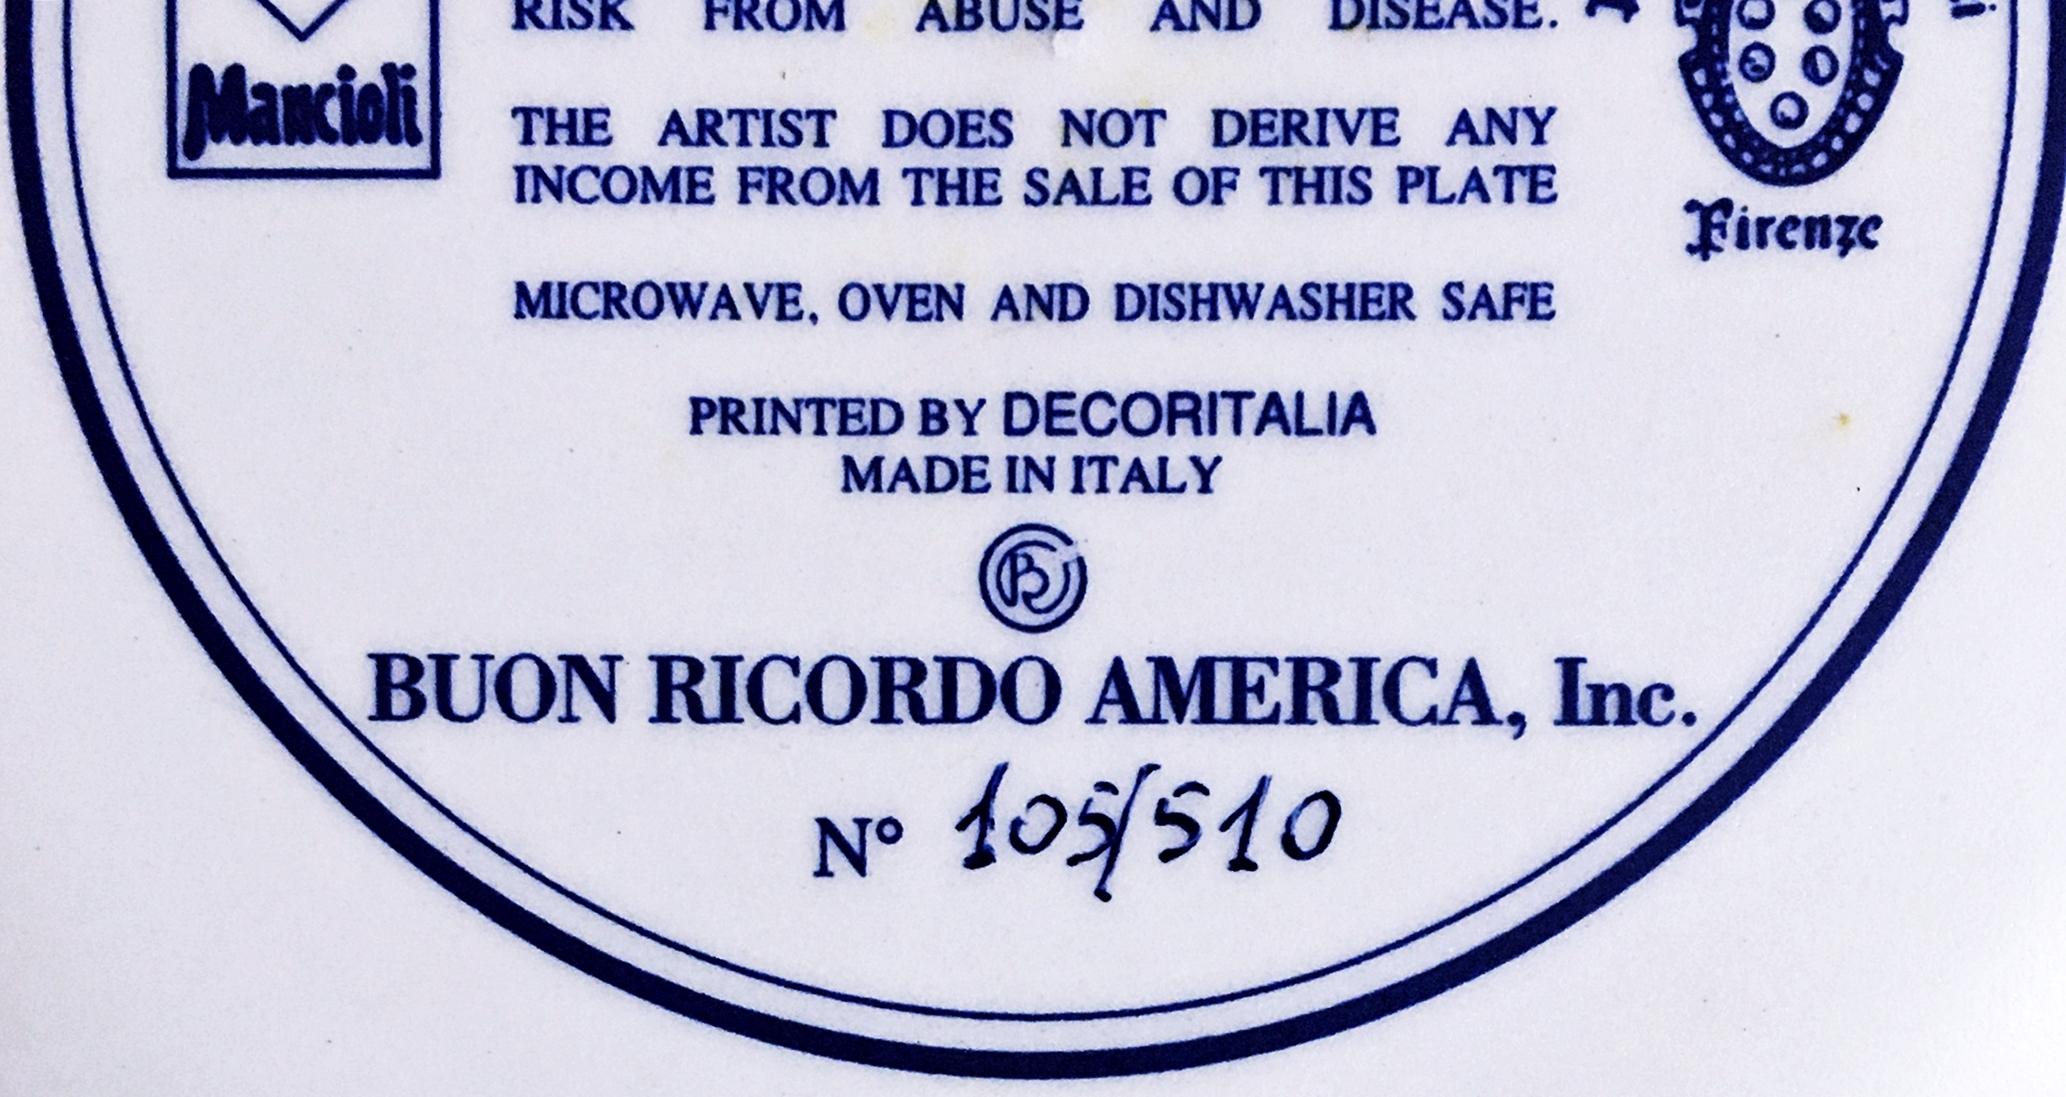 Ralph Goings
Pizza Stromboli Mezzalluna - Mezzogiorno - New York, NY, 1996
Ceramic Plate
Artist signature fired into the plate on the front and back and numbered 105 from an edition of 510.
10 1/5 inches diameter by 1/4 inch height
Unframed
This